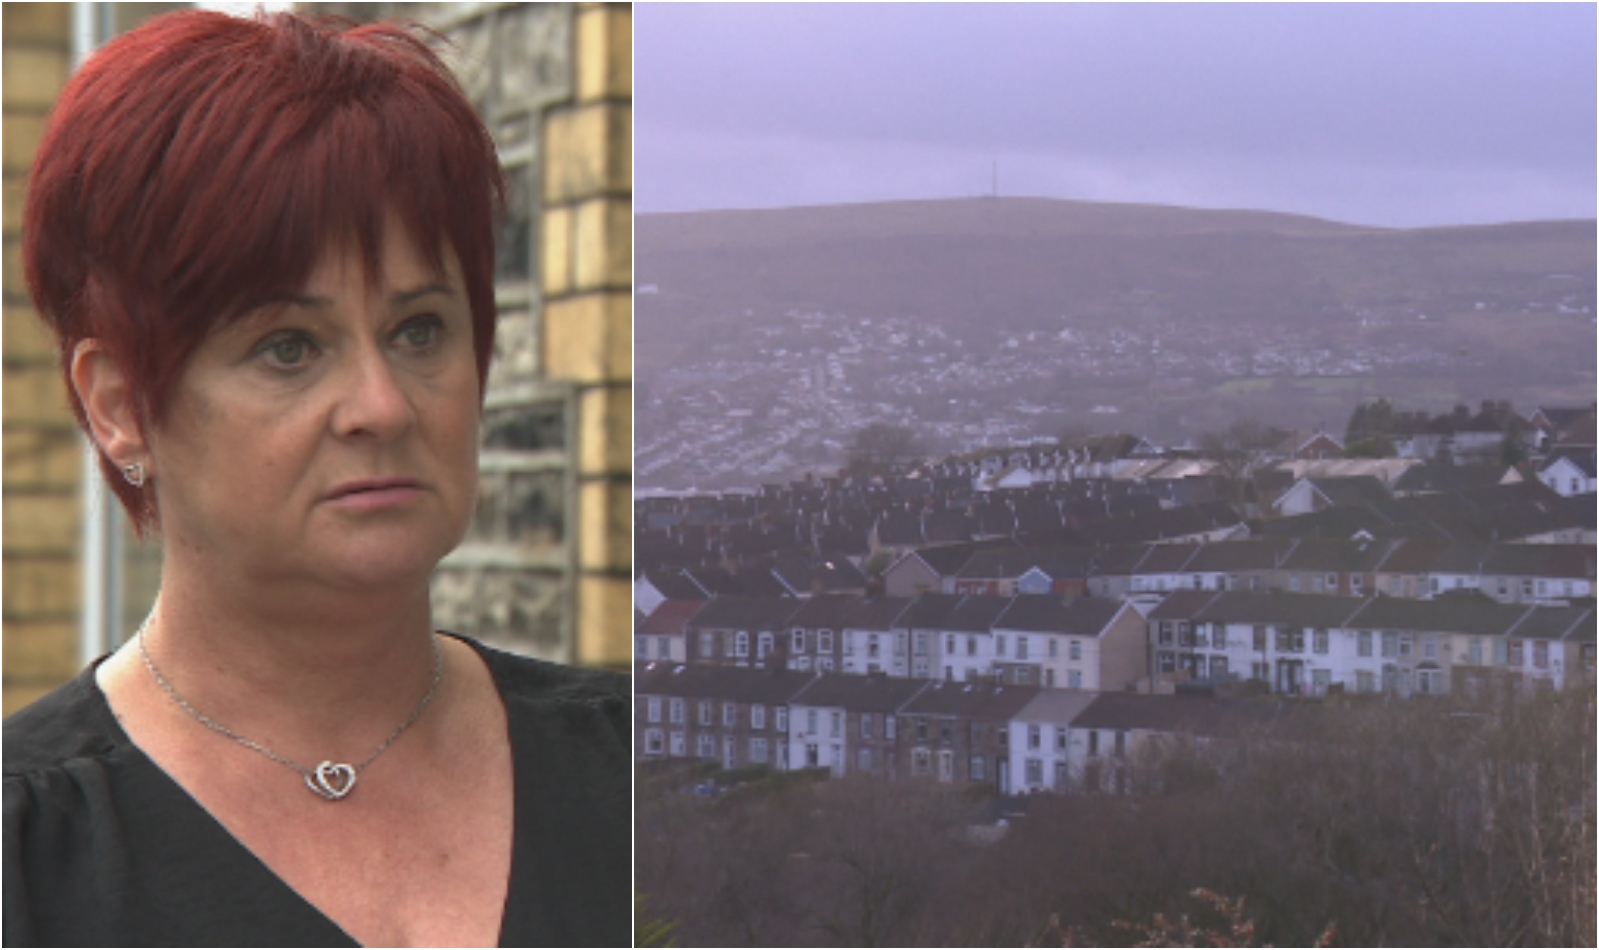 People scared and worried as Merthyr Tydfil faces possibility of local lockdown ITV News Wales